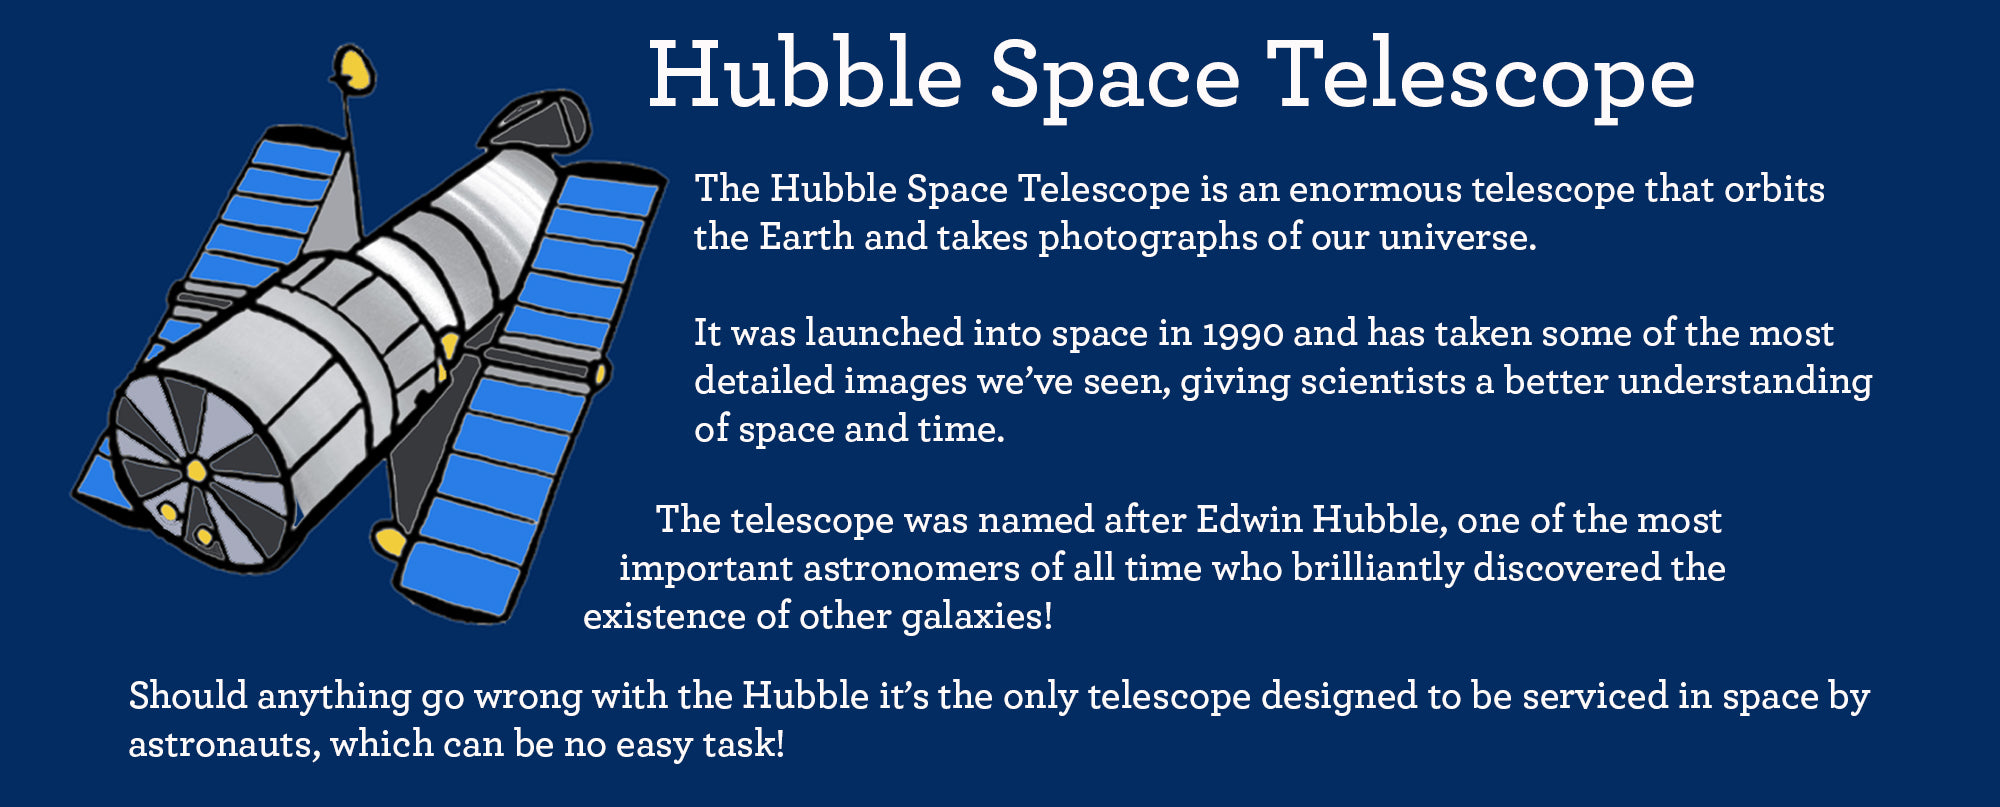 facts about hubble space telescope